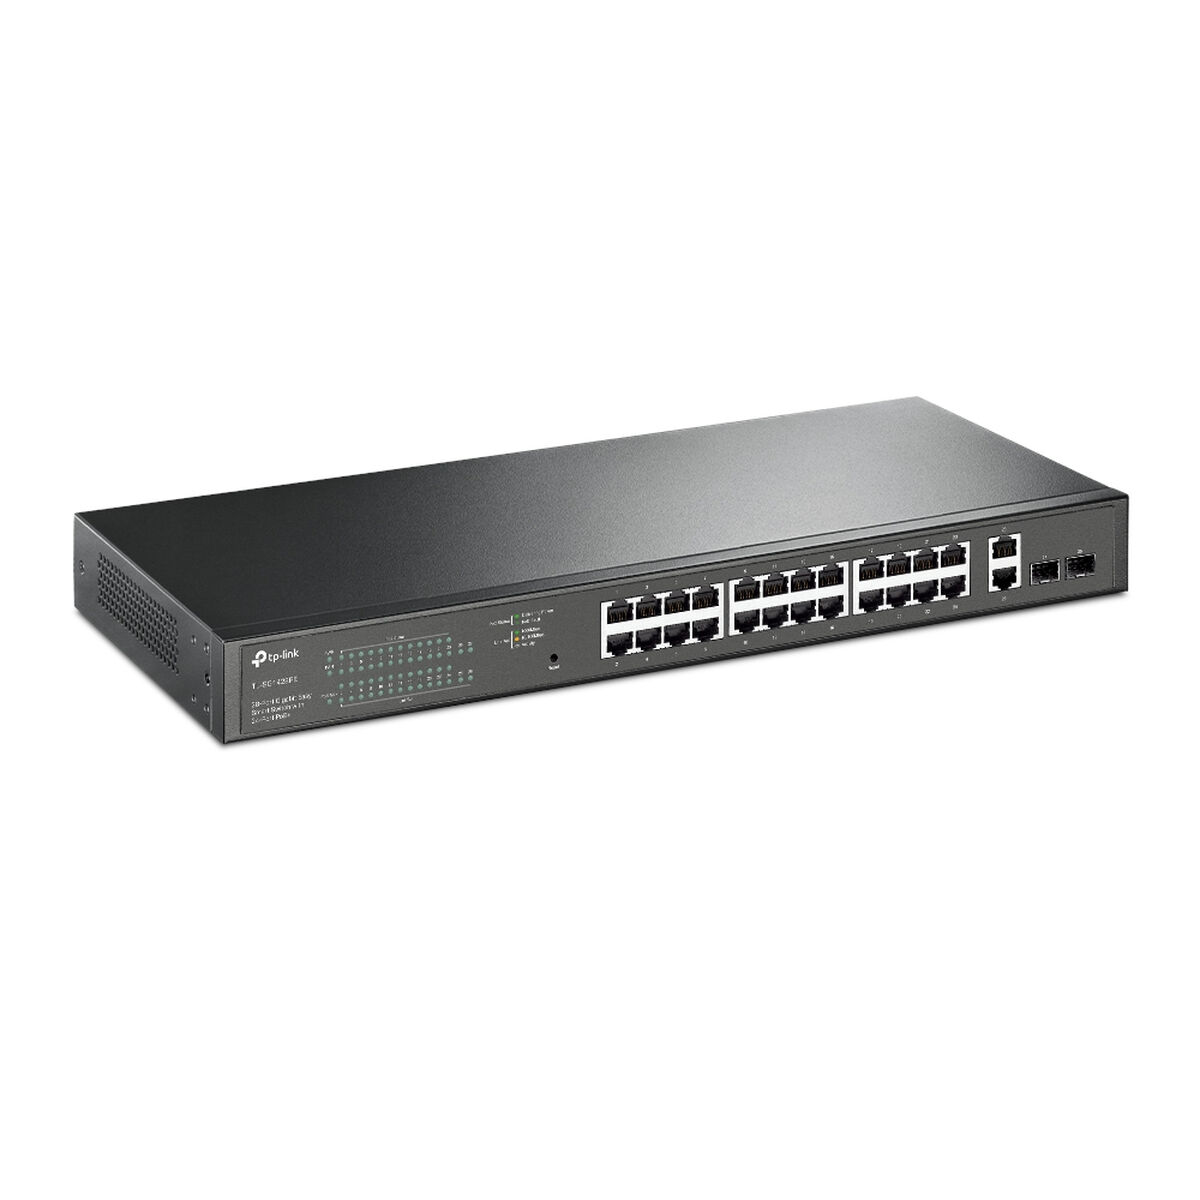 26 Switch TL-SG1428PE TP-LINK